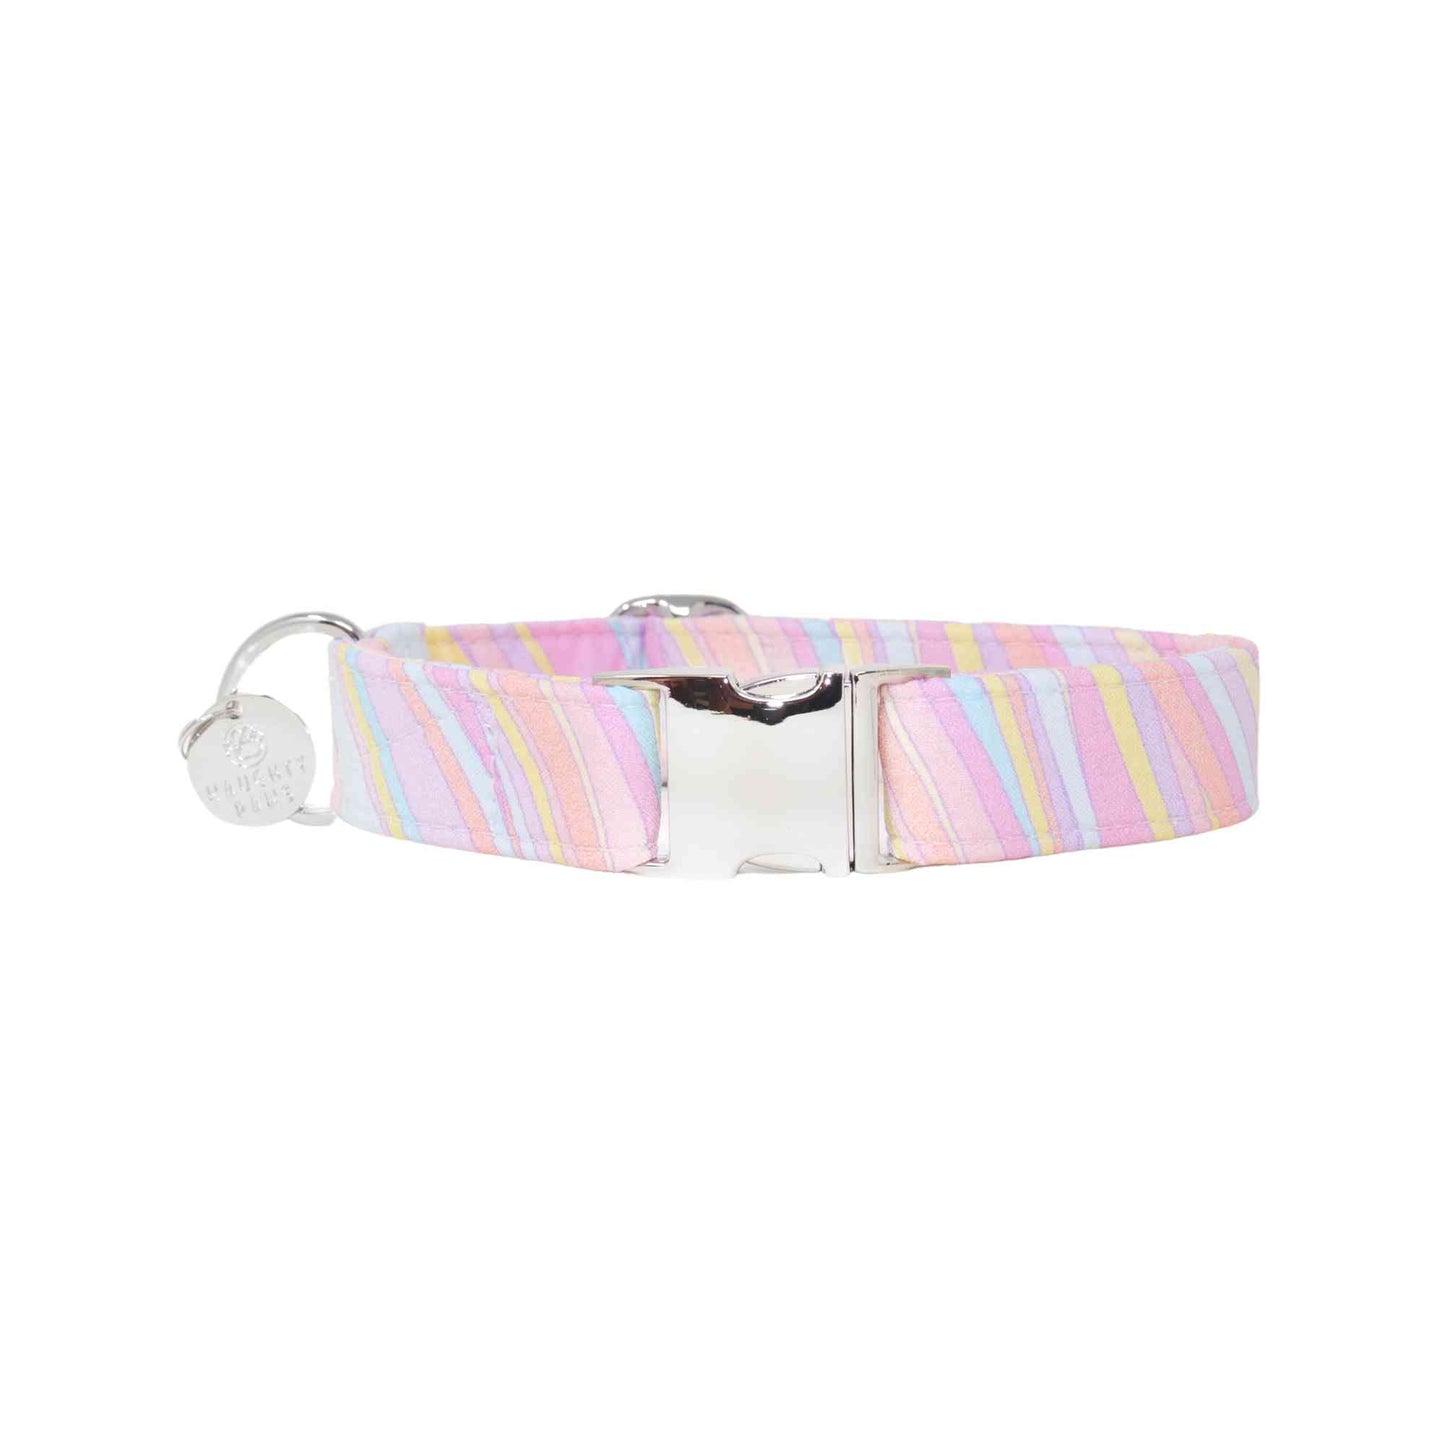 Unicorn Pastels girl or boy dog collar perfect for Easter or Spring